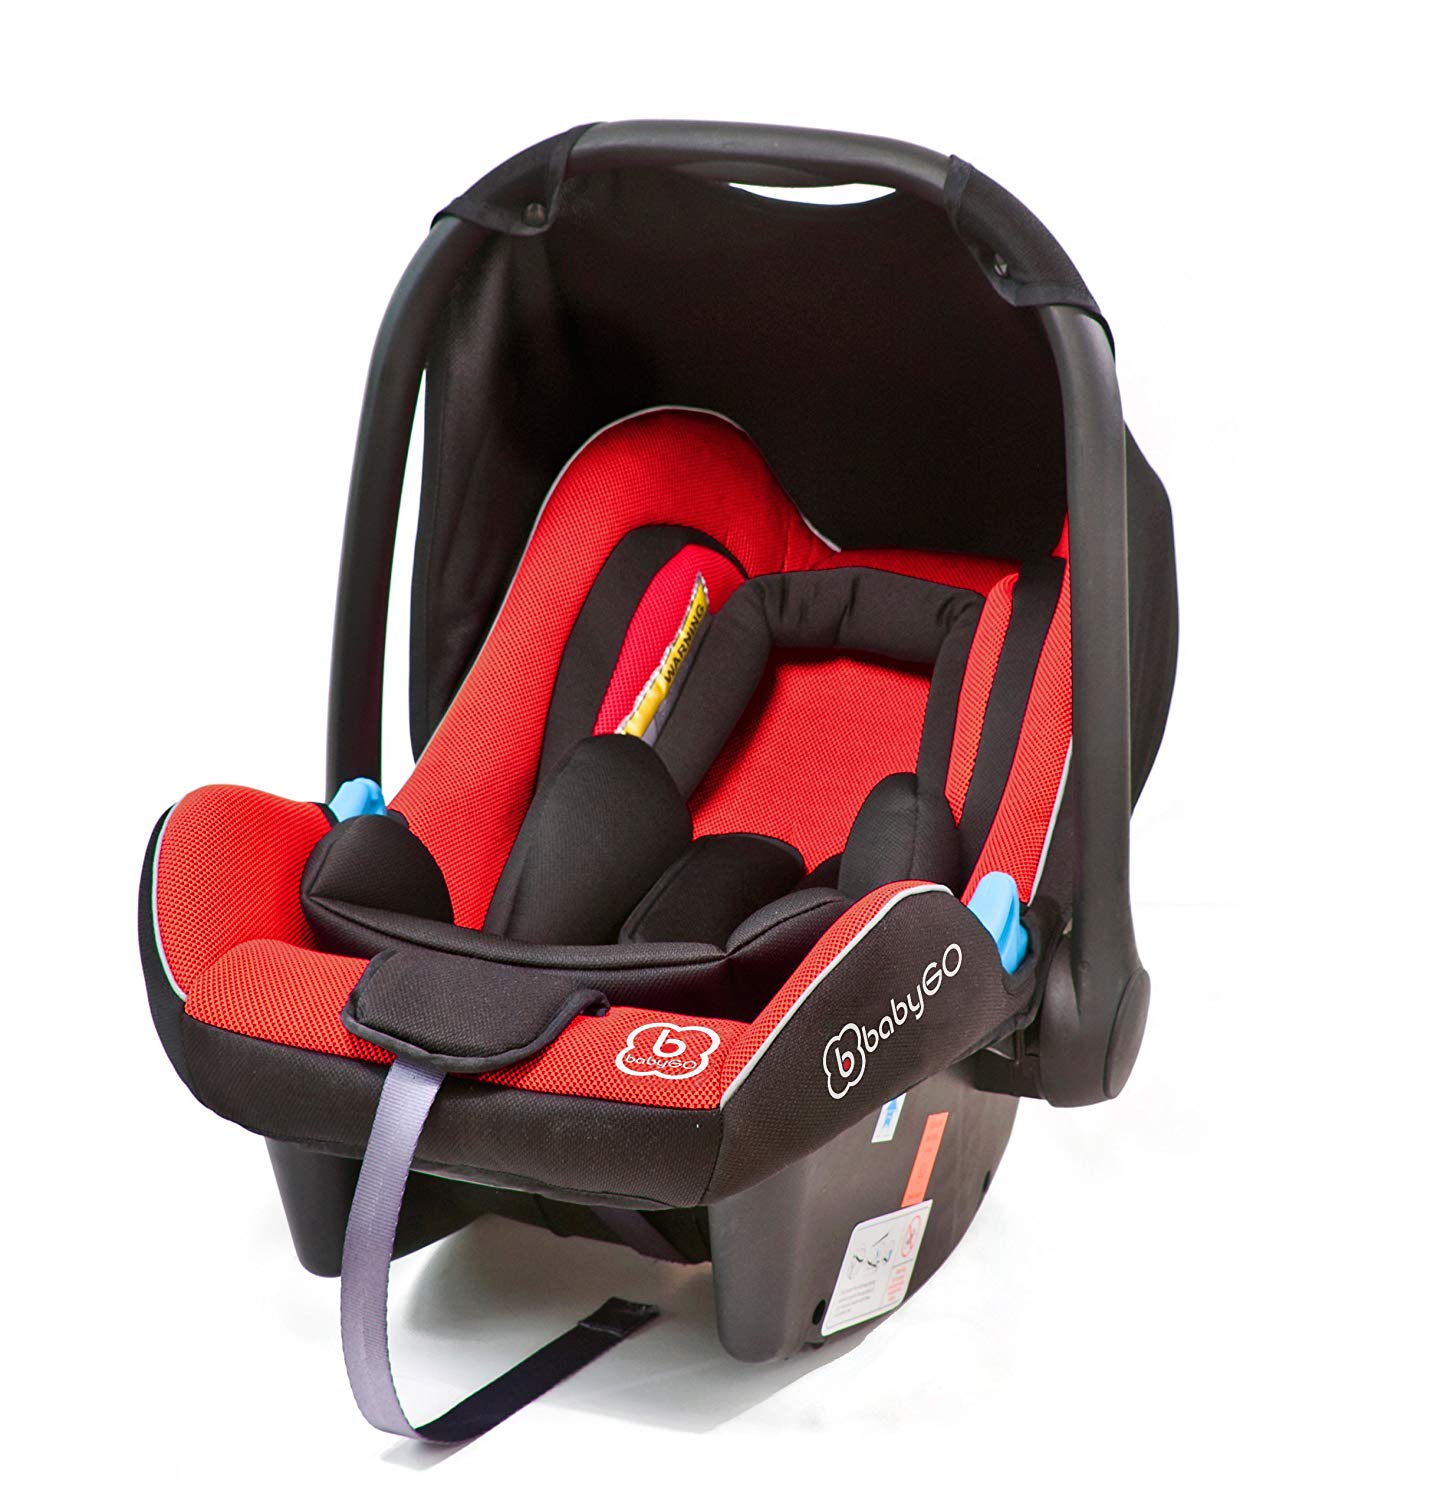 BabyGo 1204 Travel XP Side Protect with EPS System